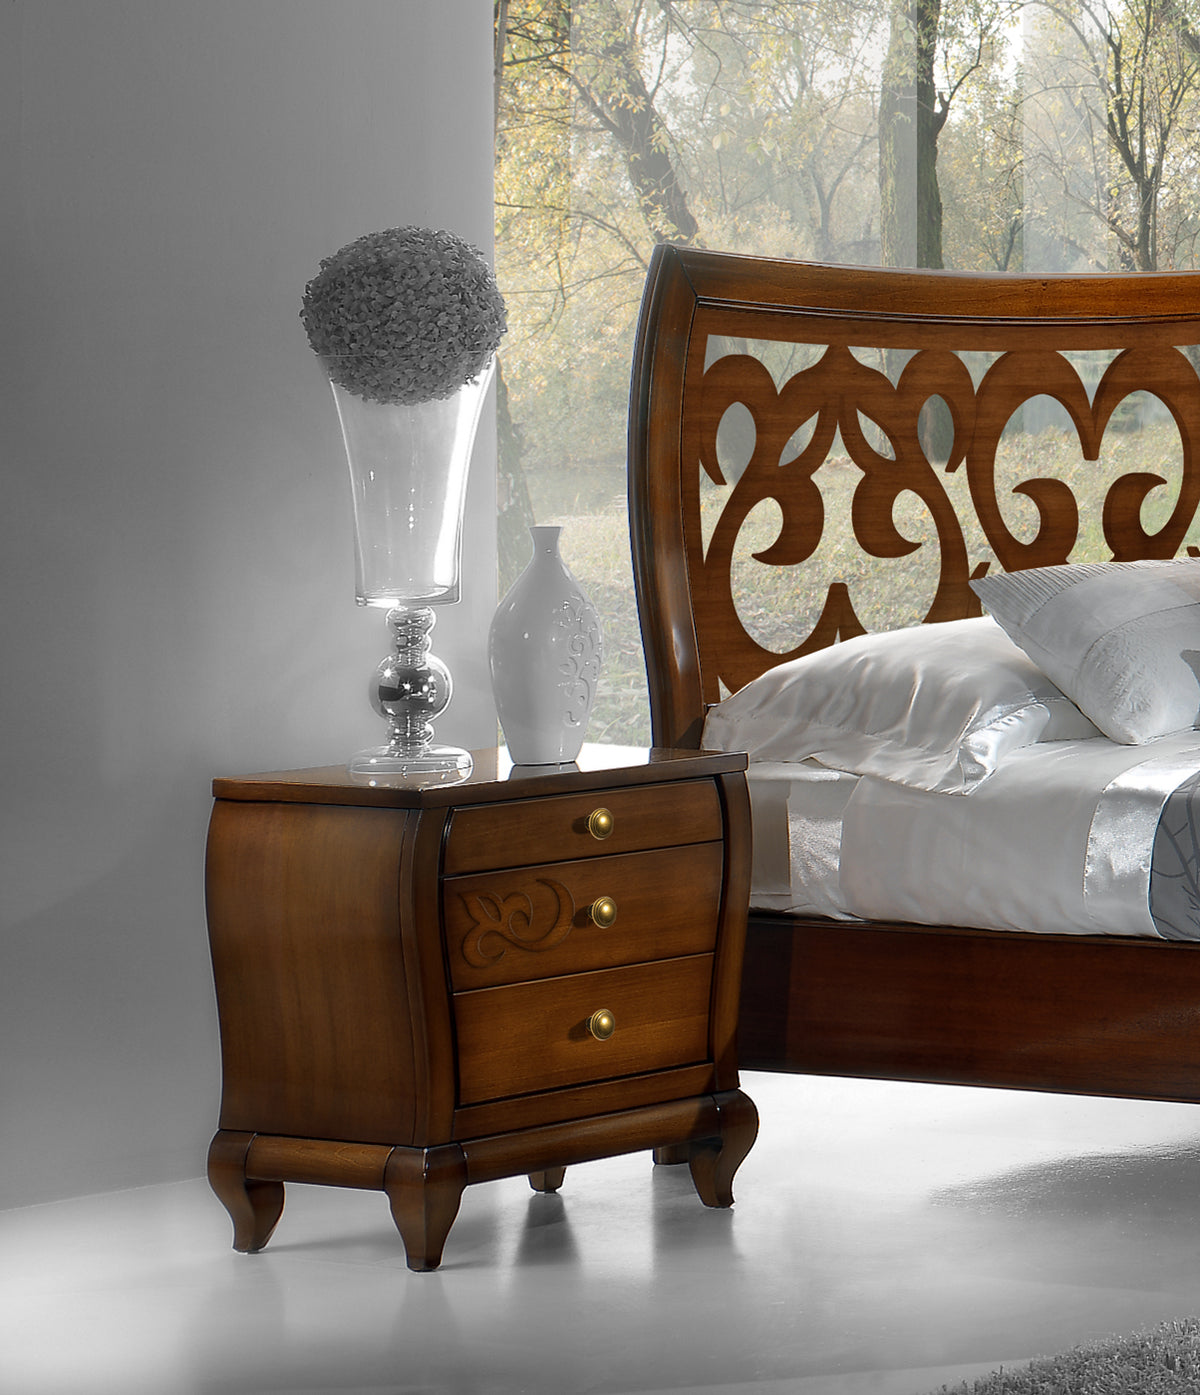 Classic Shaped Container Bedside Table L 55 in Cherry Wood Finish Visconti Piombini Art Collection 